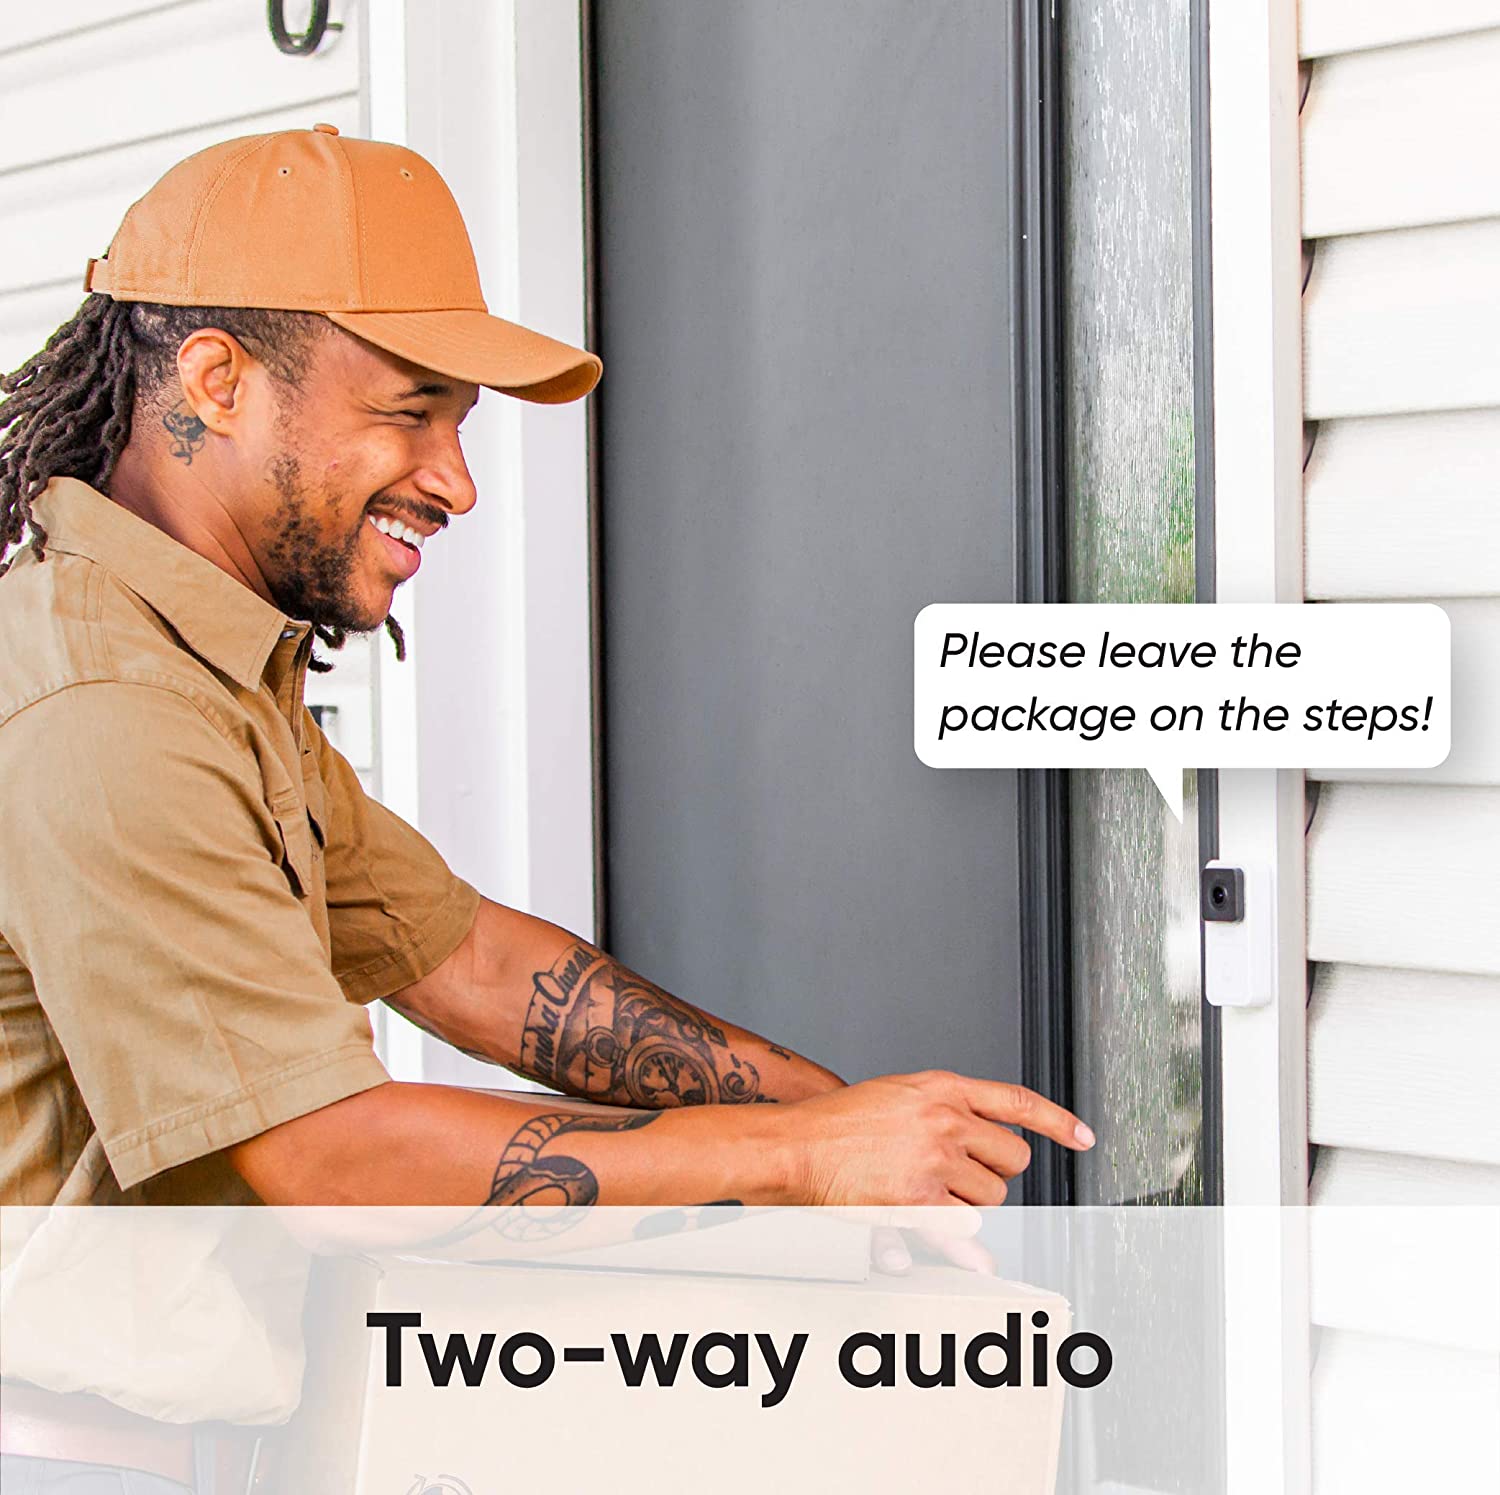 Delivery person dropping off packages in front of video doorbell camera. Text overlay says "Two-way audio."